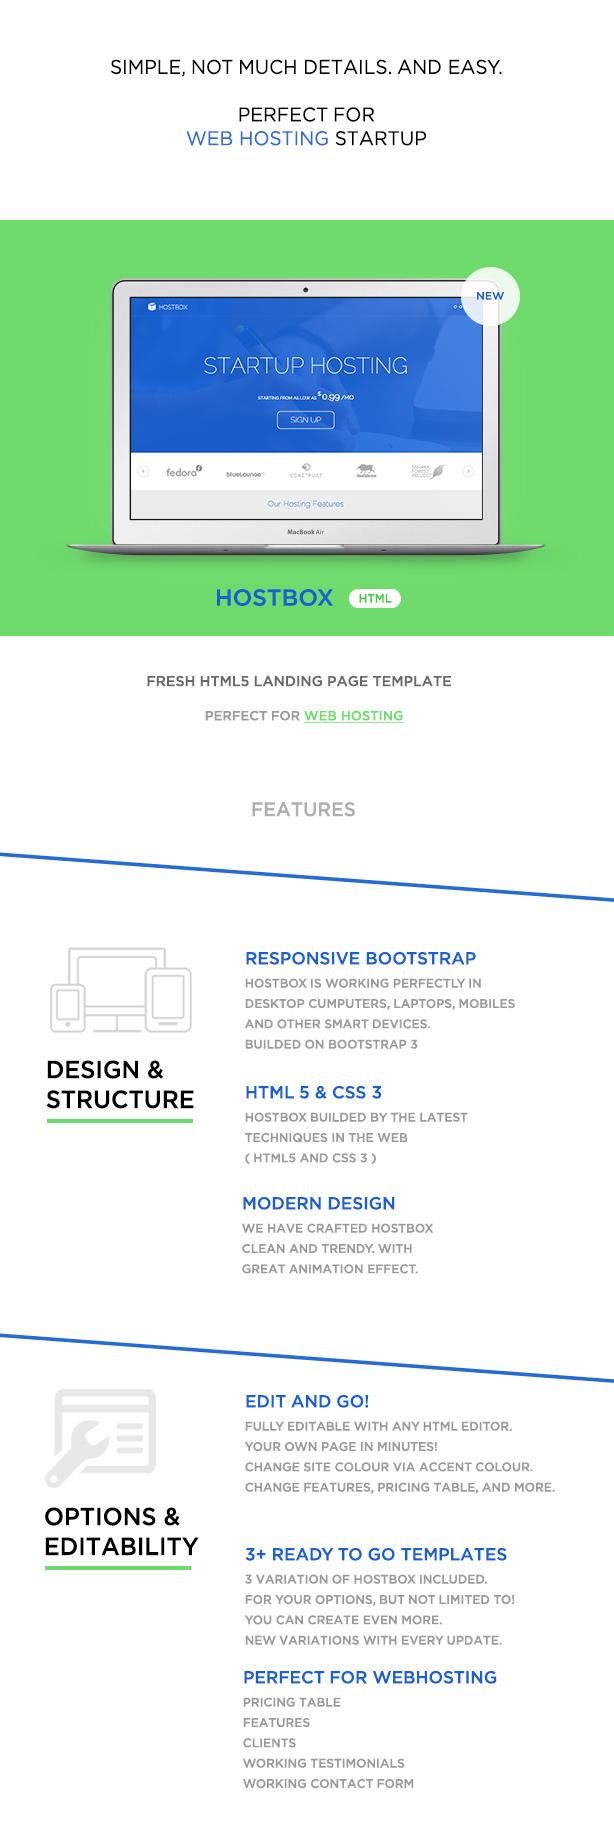 Hostbox WHMCS & HTML5 Landing Page - 4